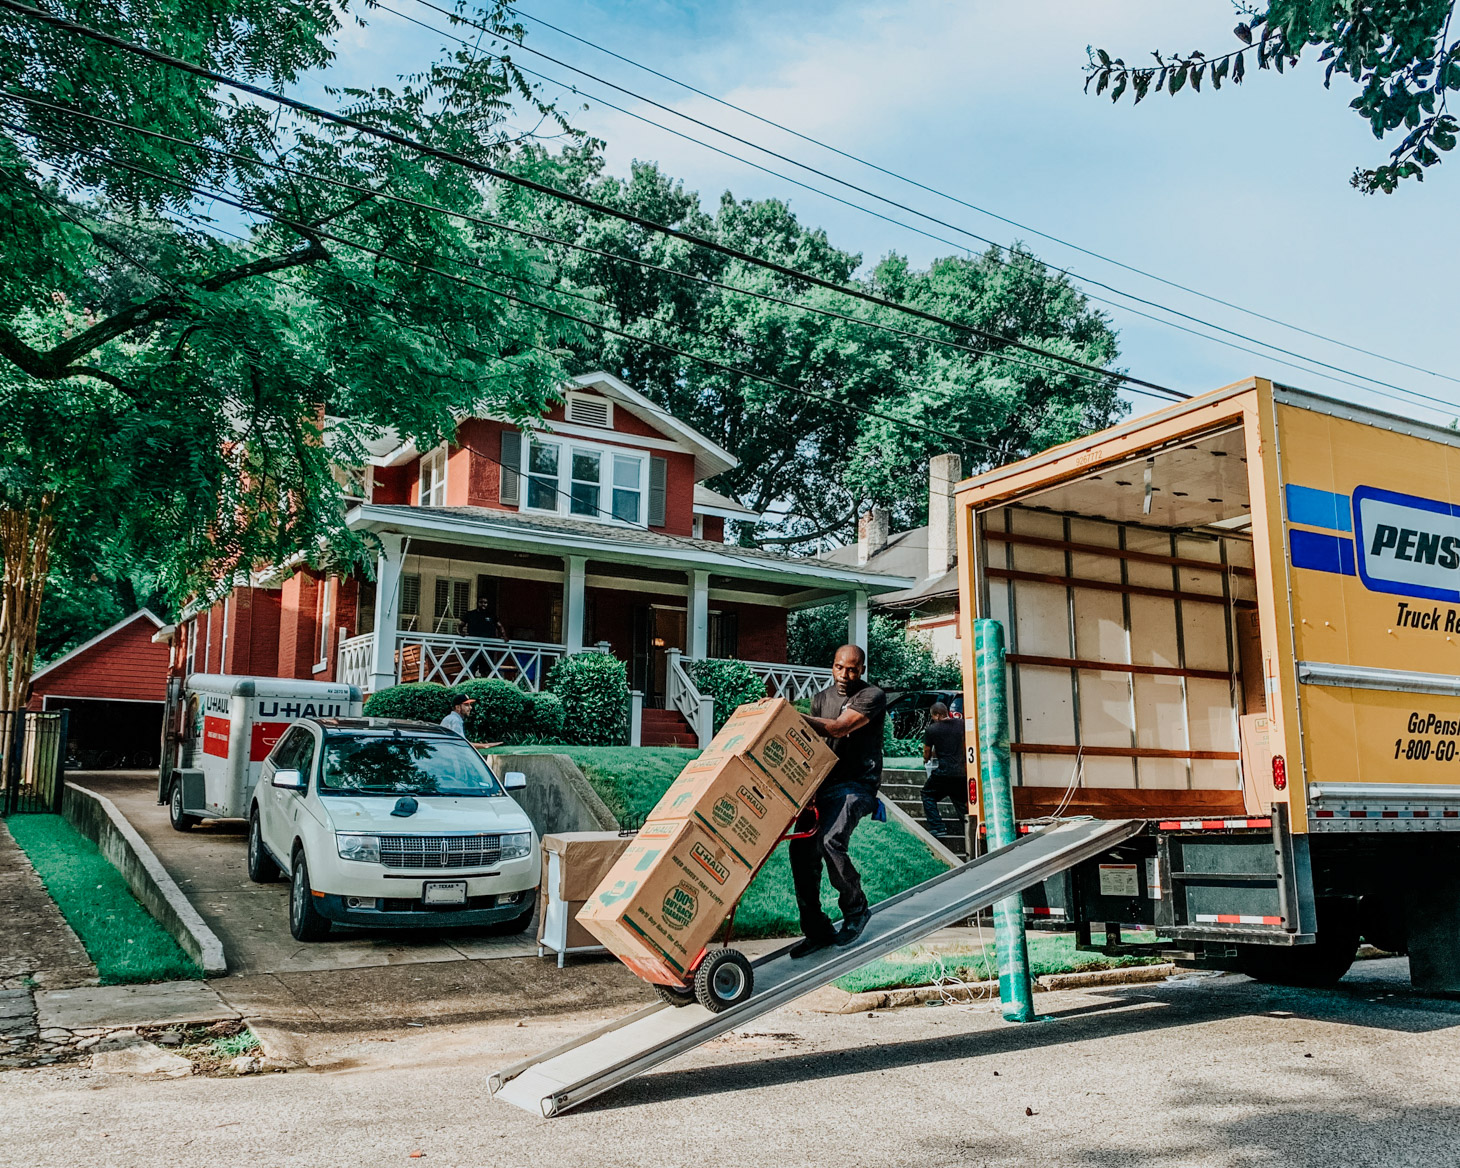 How to Save Money While Moving, UHaul review featured by top US lifestyle blog, Lone Star Looking Glass